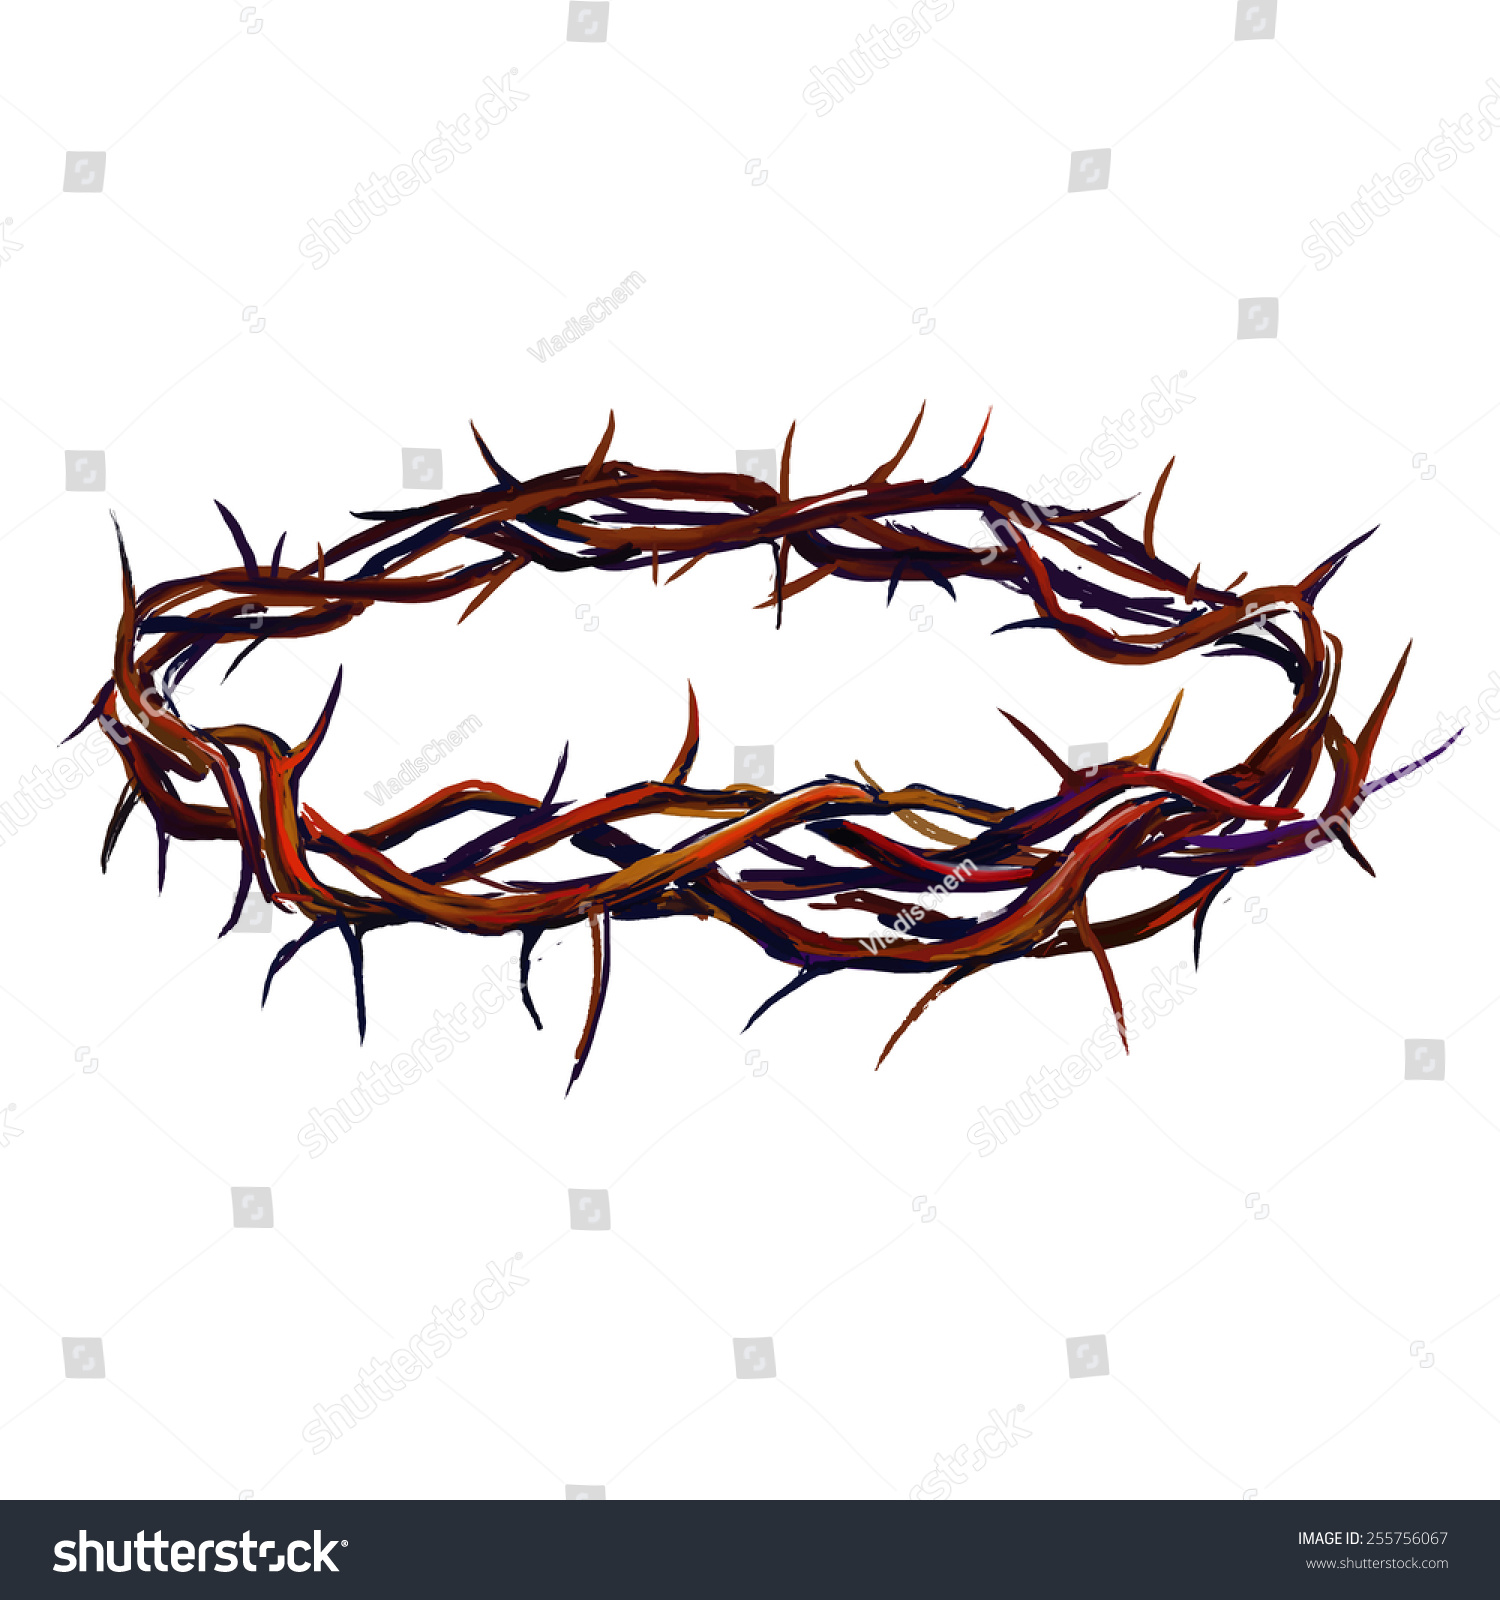 Crown Of Thorns Vector Illustration Hand Drawn Painted - 255756067